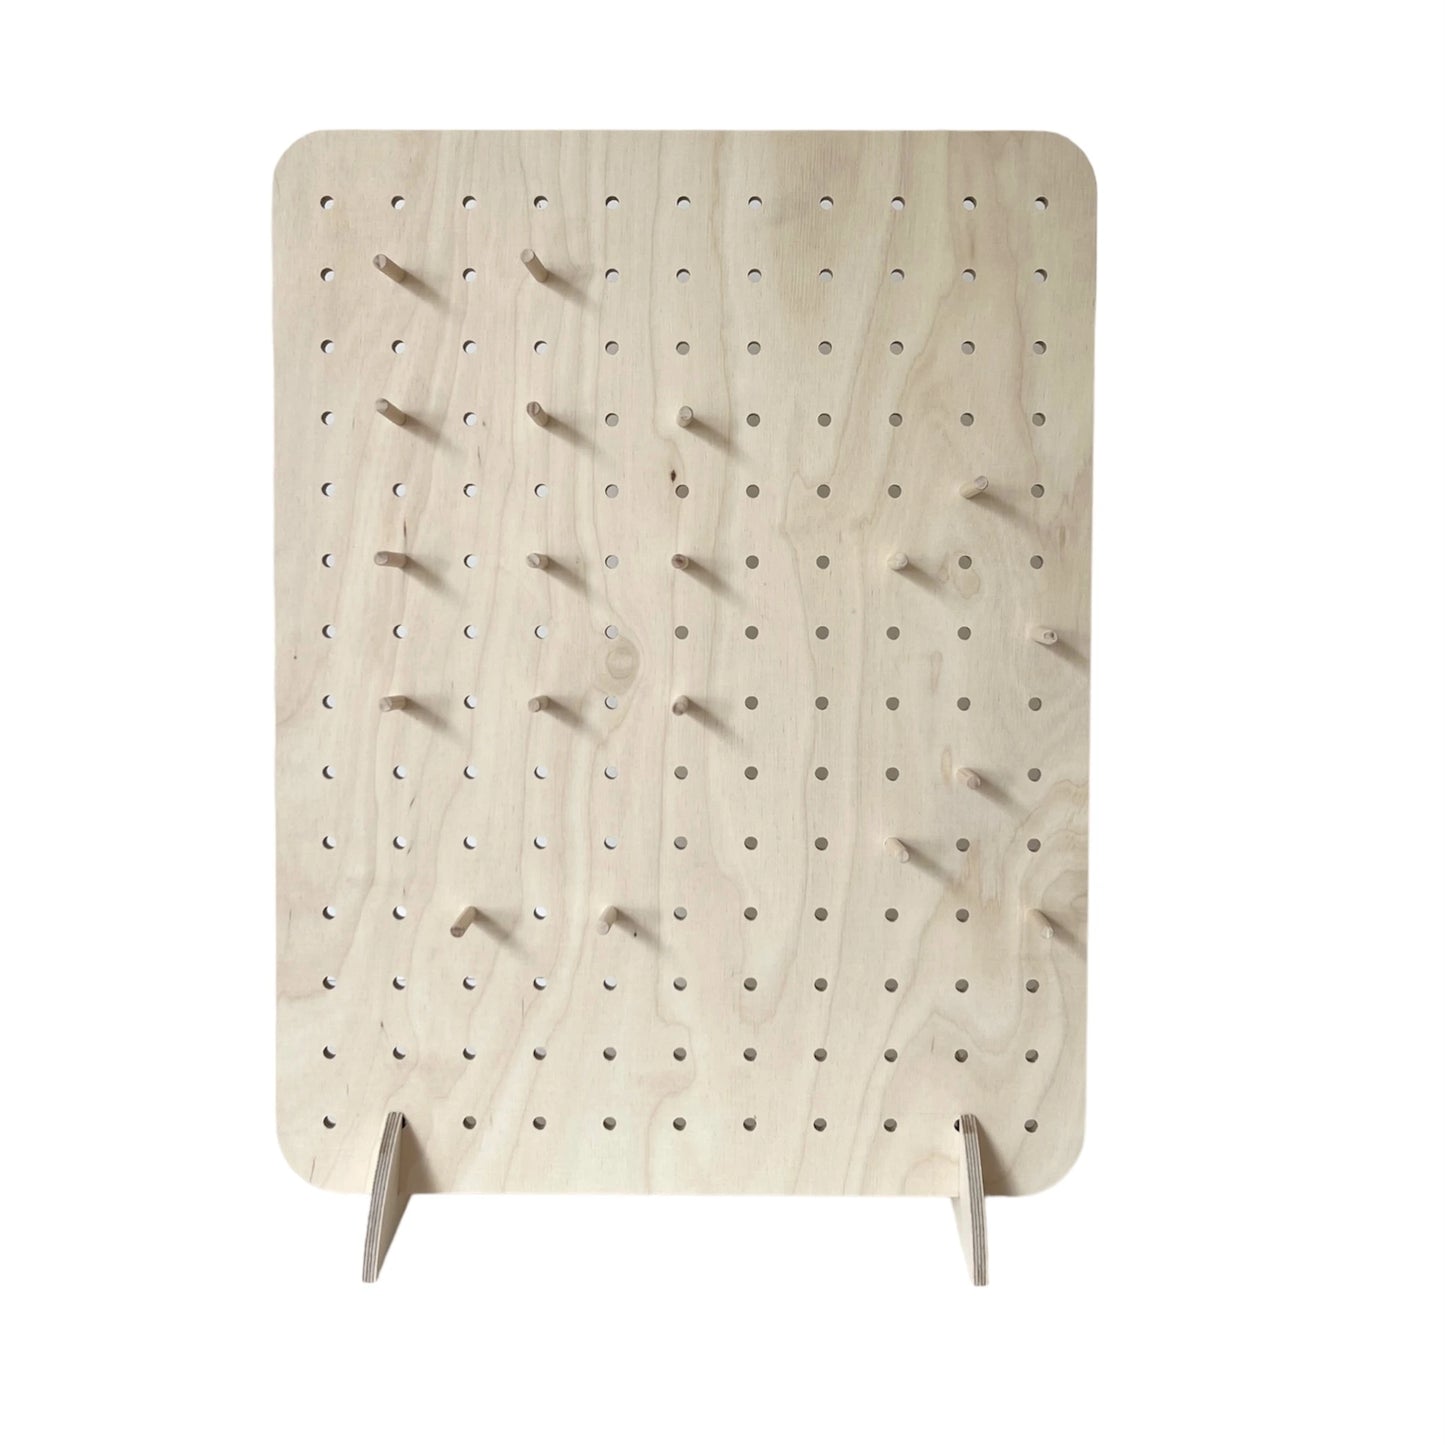 Pale wooden pegboard with small 6mm drilled holes and some pegs facing to front.